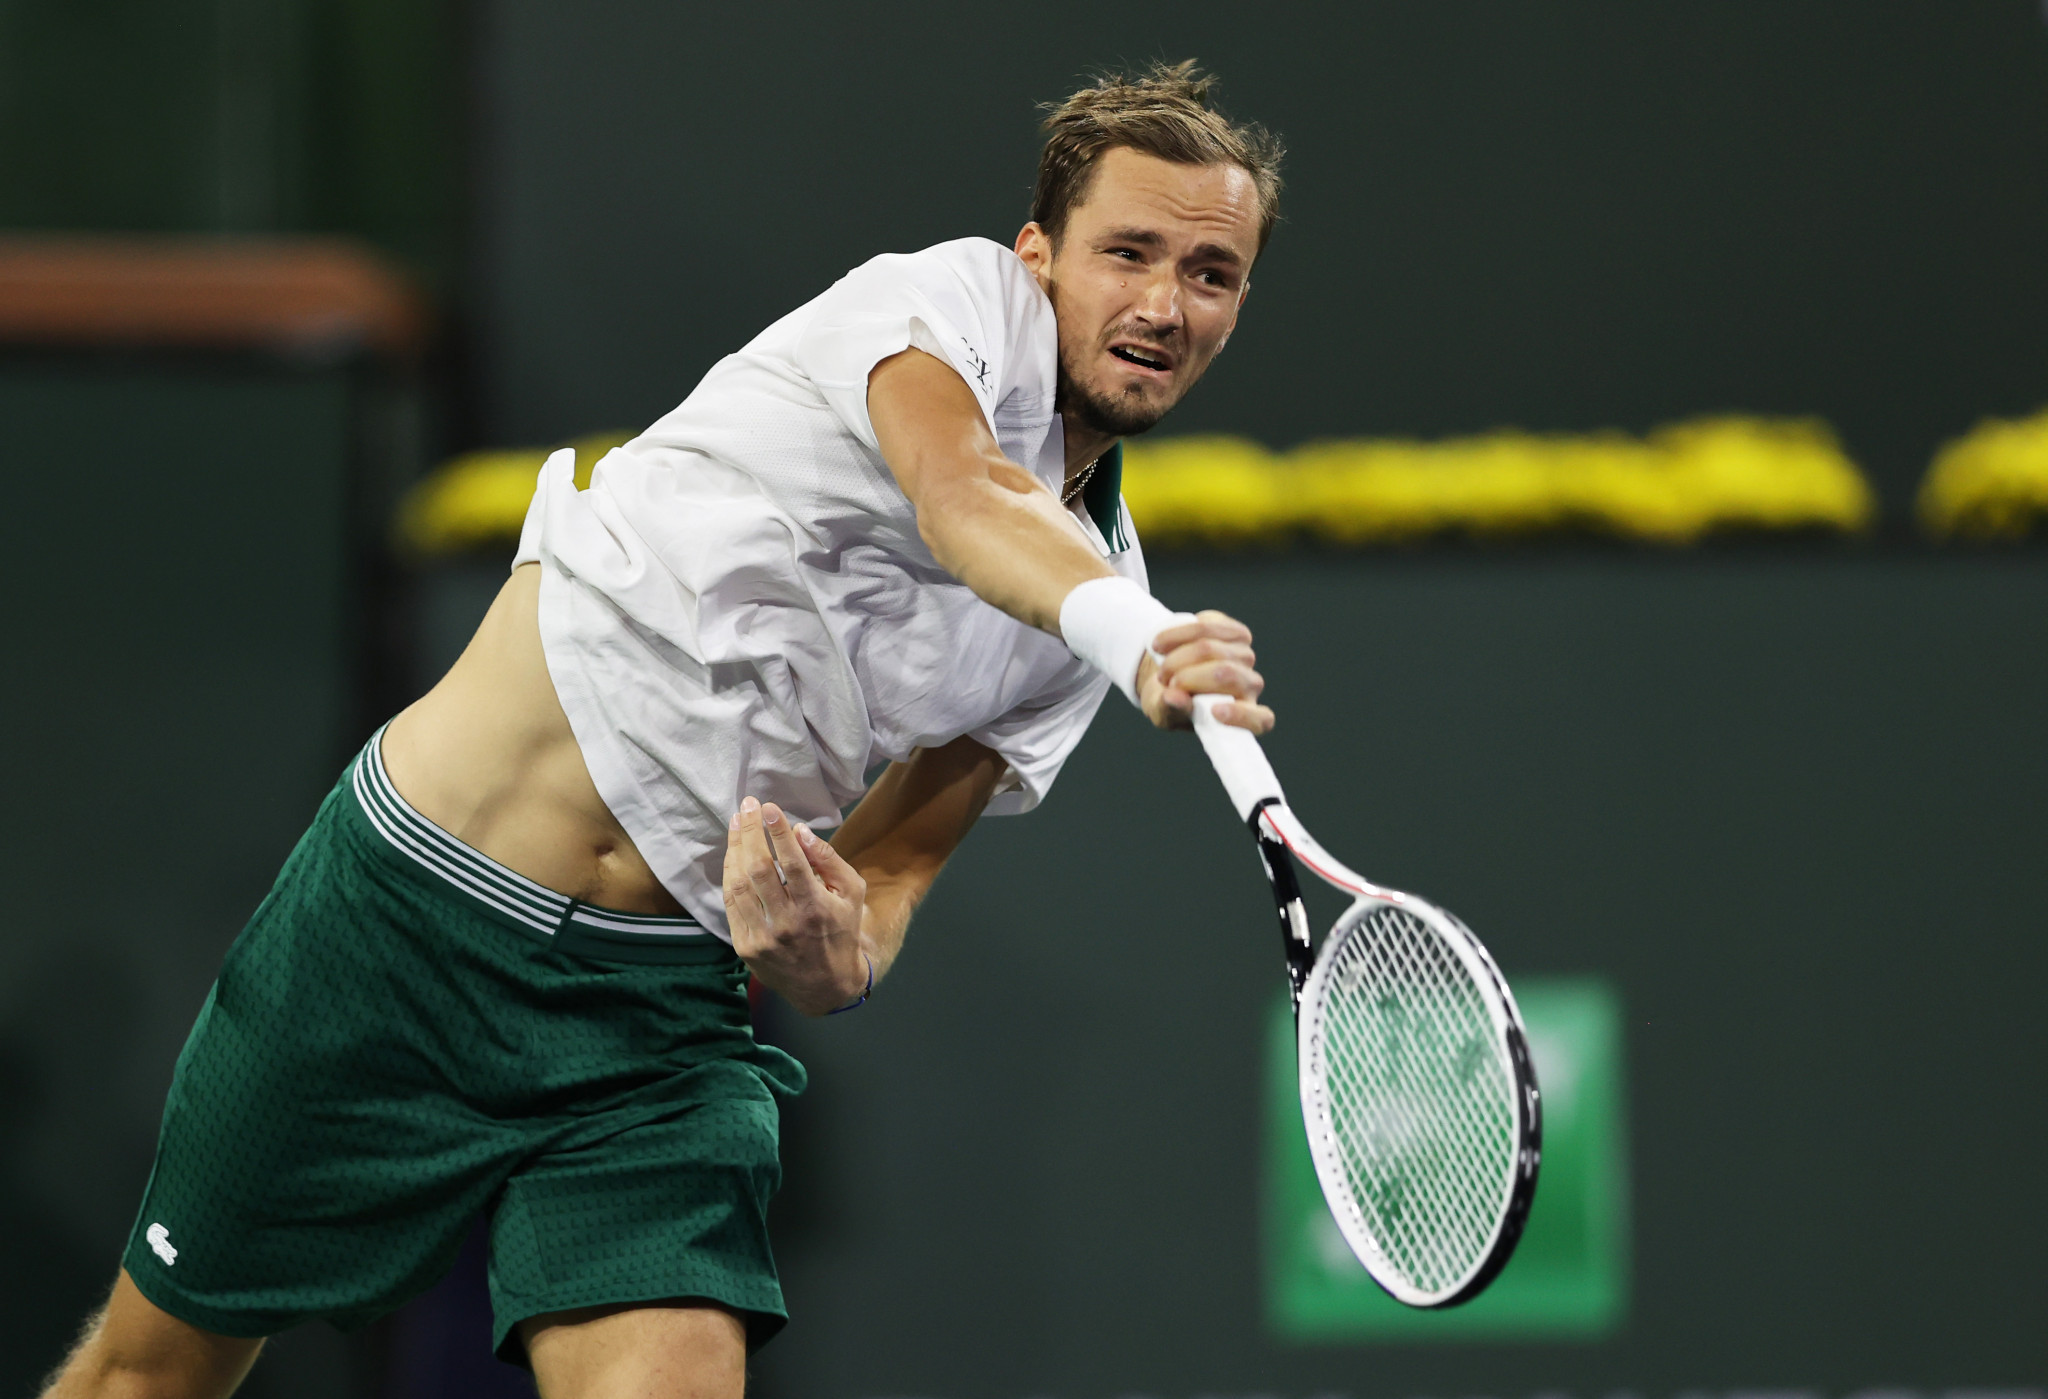 Top seed Medvedev among second-round winners at Indian Wells Masters